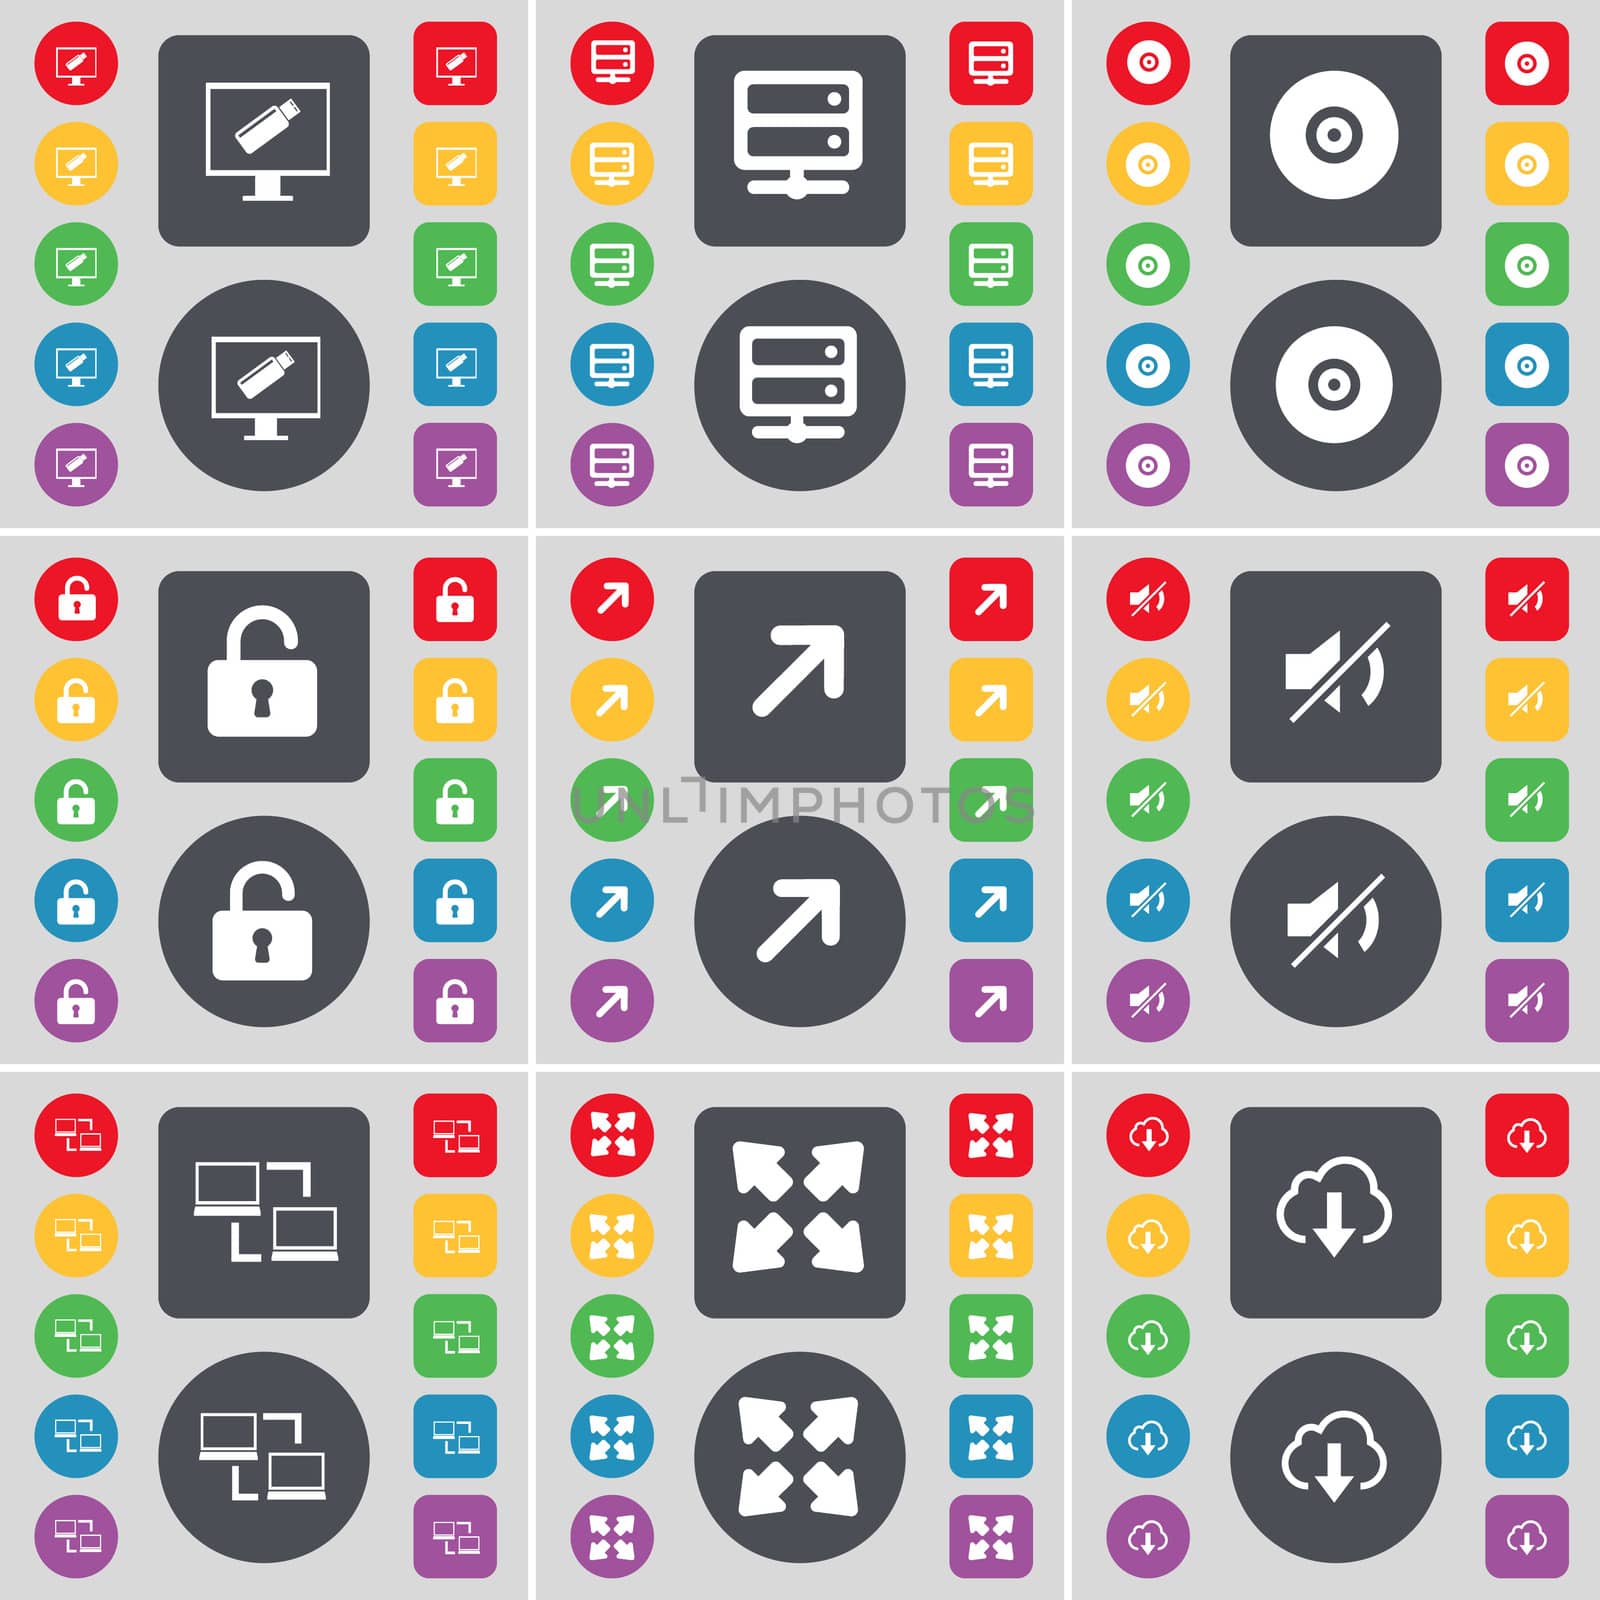 Monitor, Server, Disk, Lock, Full screen, Mute, Connection, Full screen, Cloud icon symbol. A large set of flat, colored buttons for your design. illustration